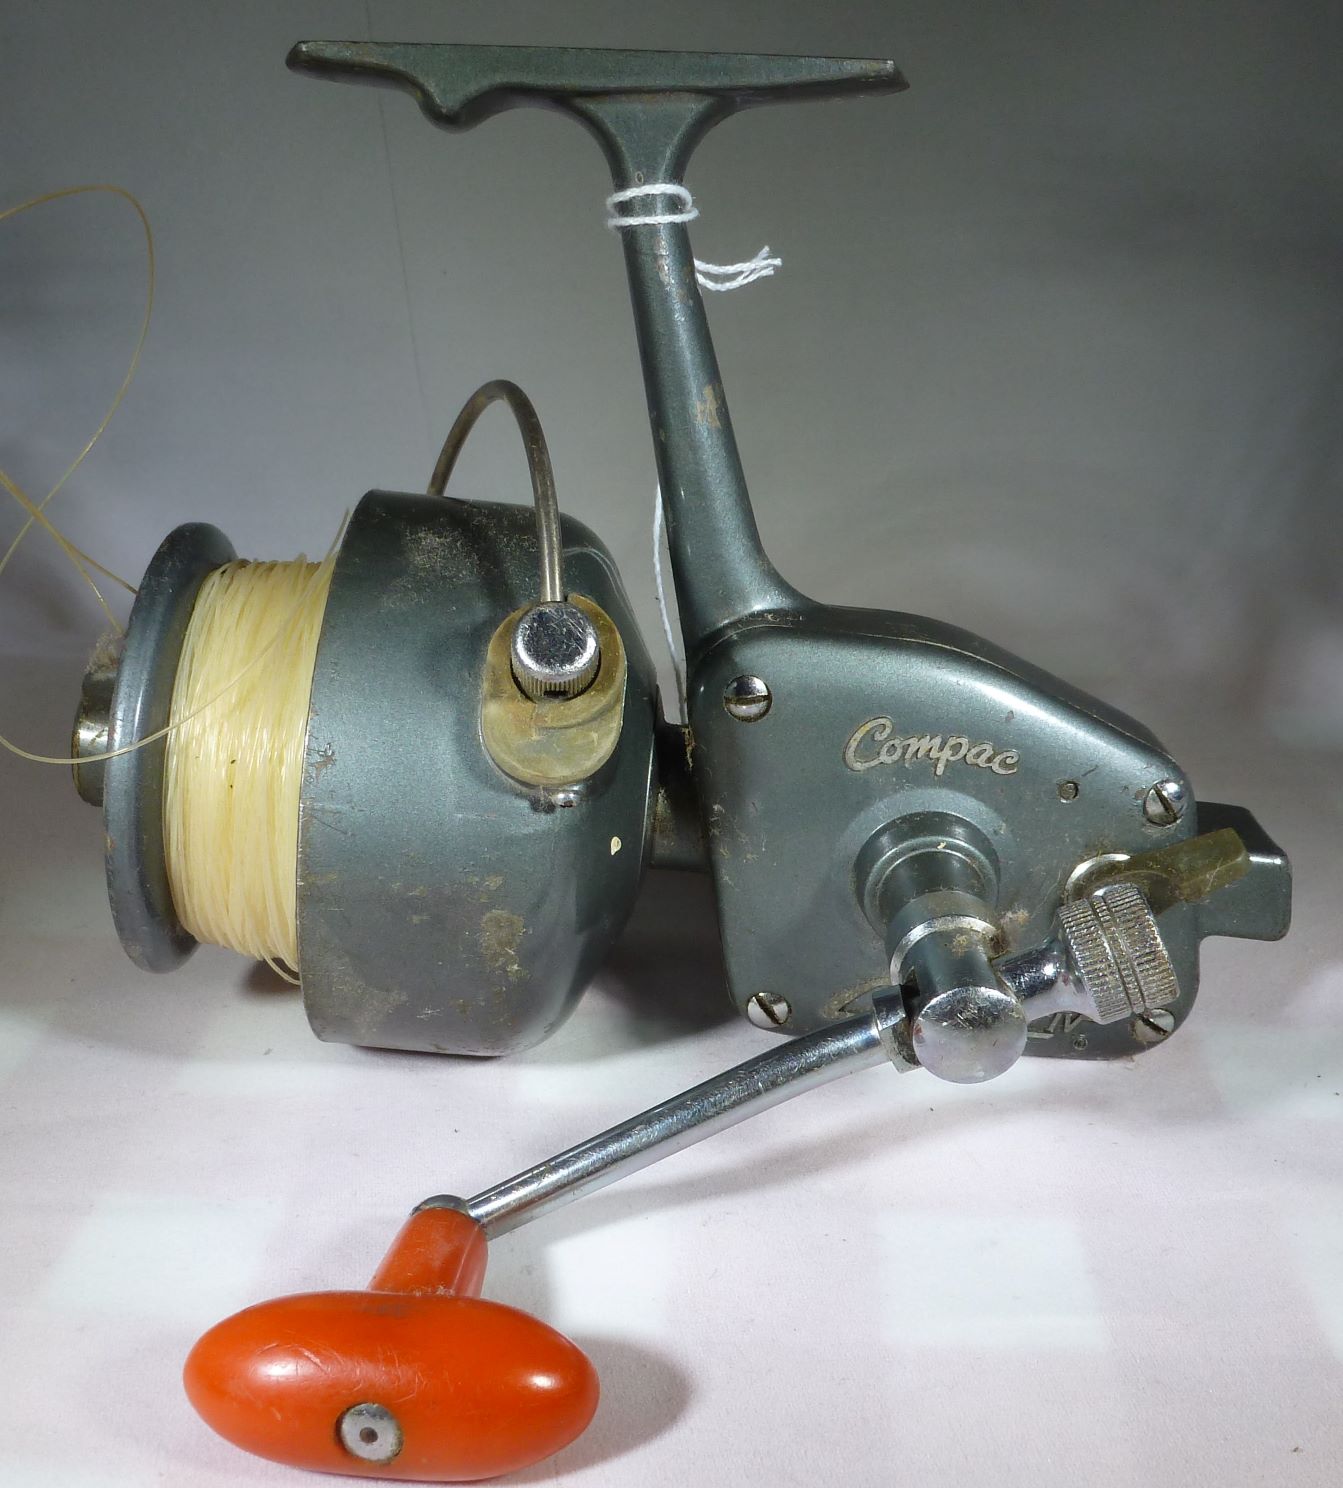 Sold at Auction: Penn Pear #109 Fishing Reel